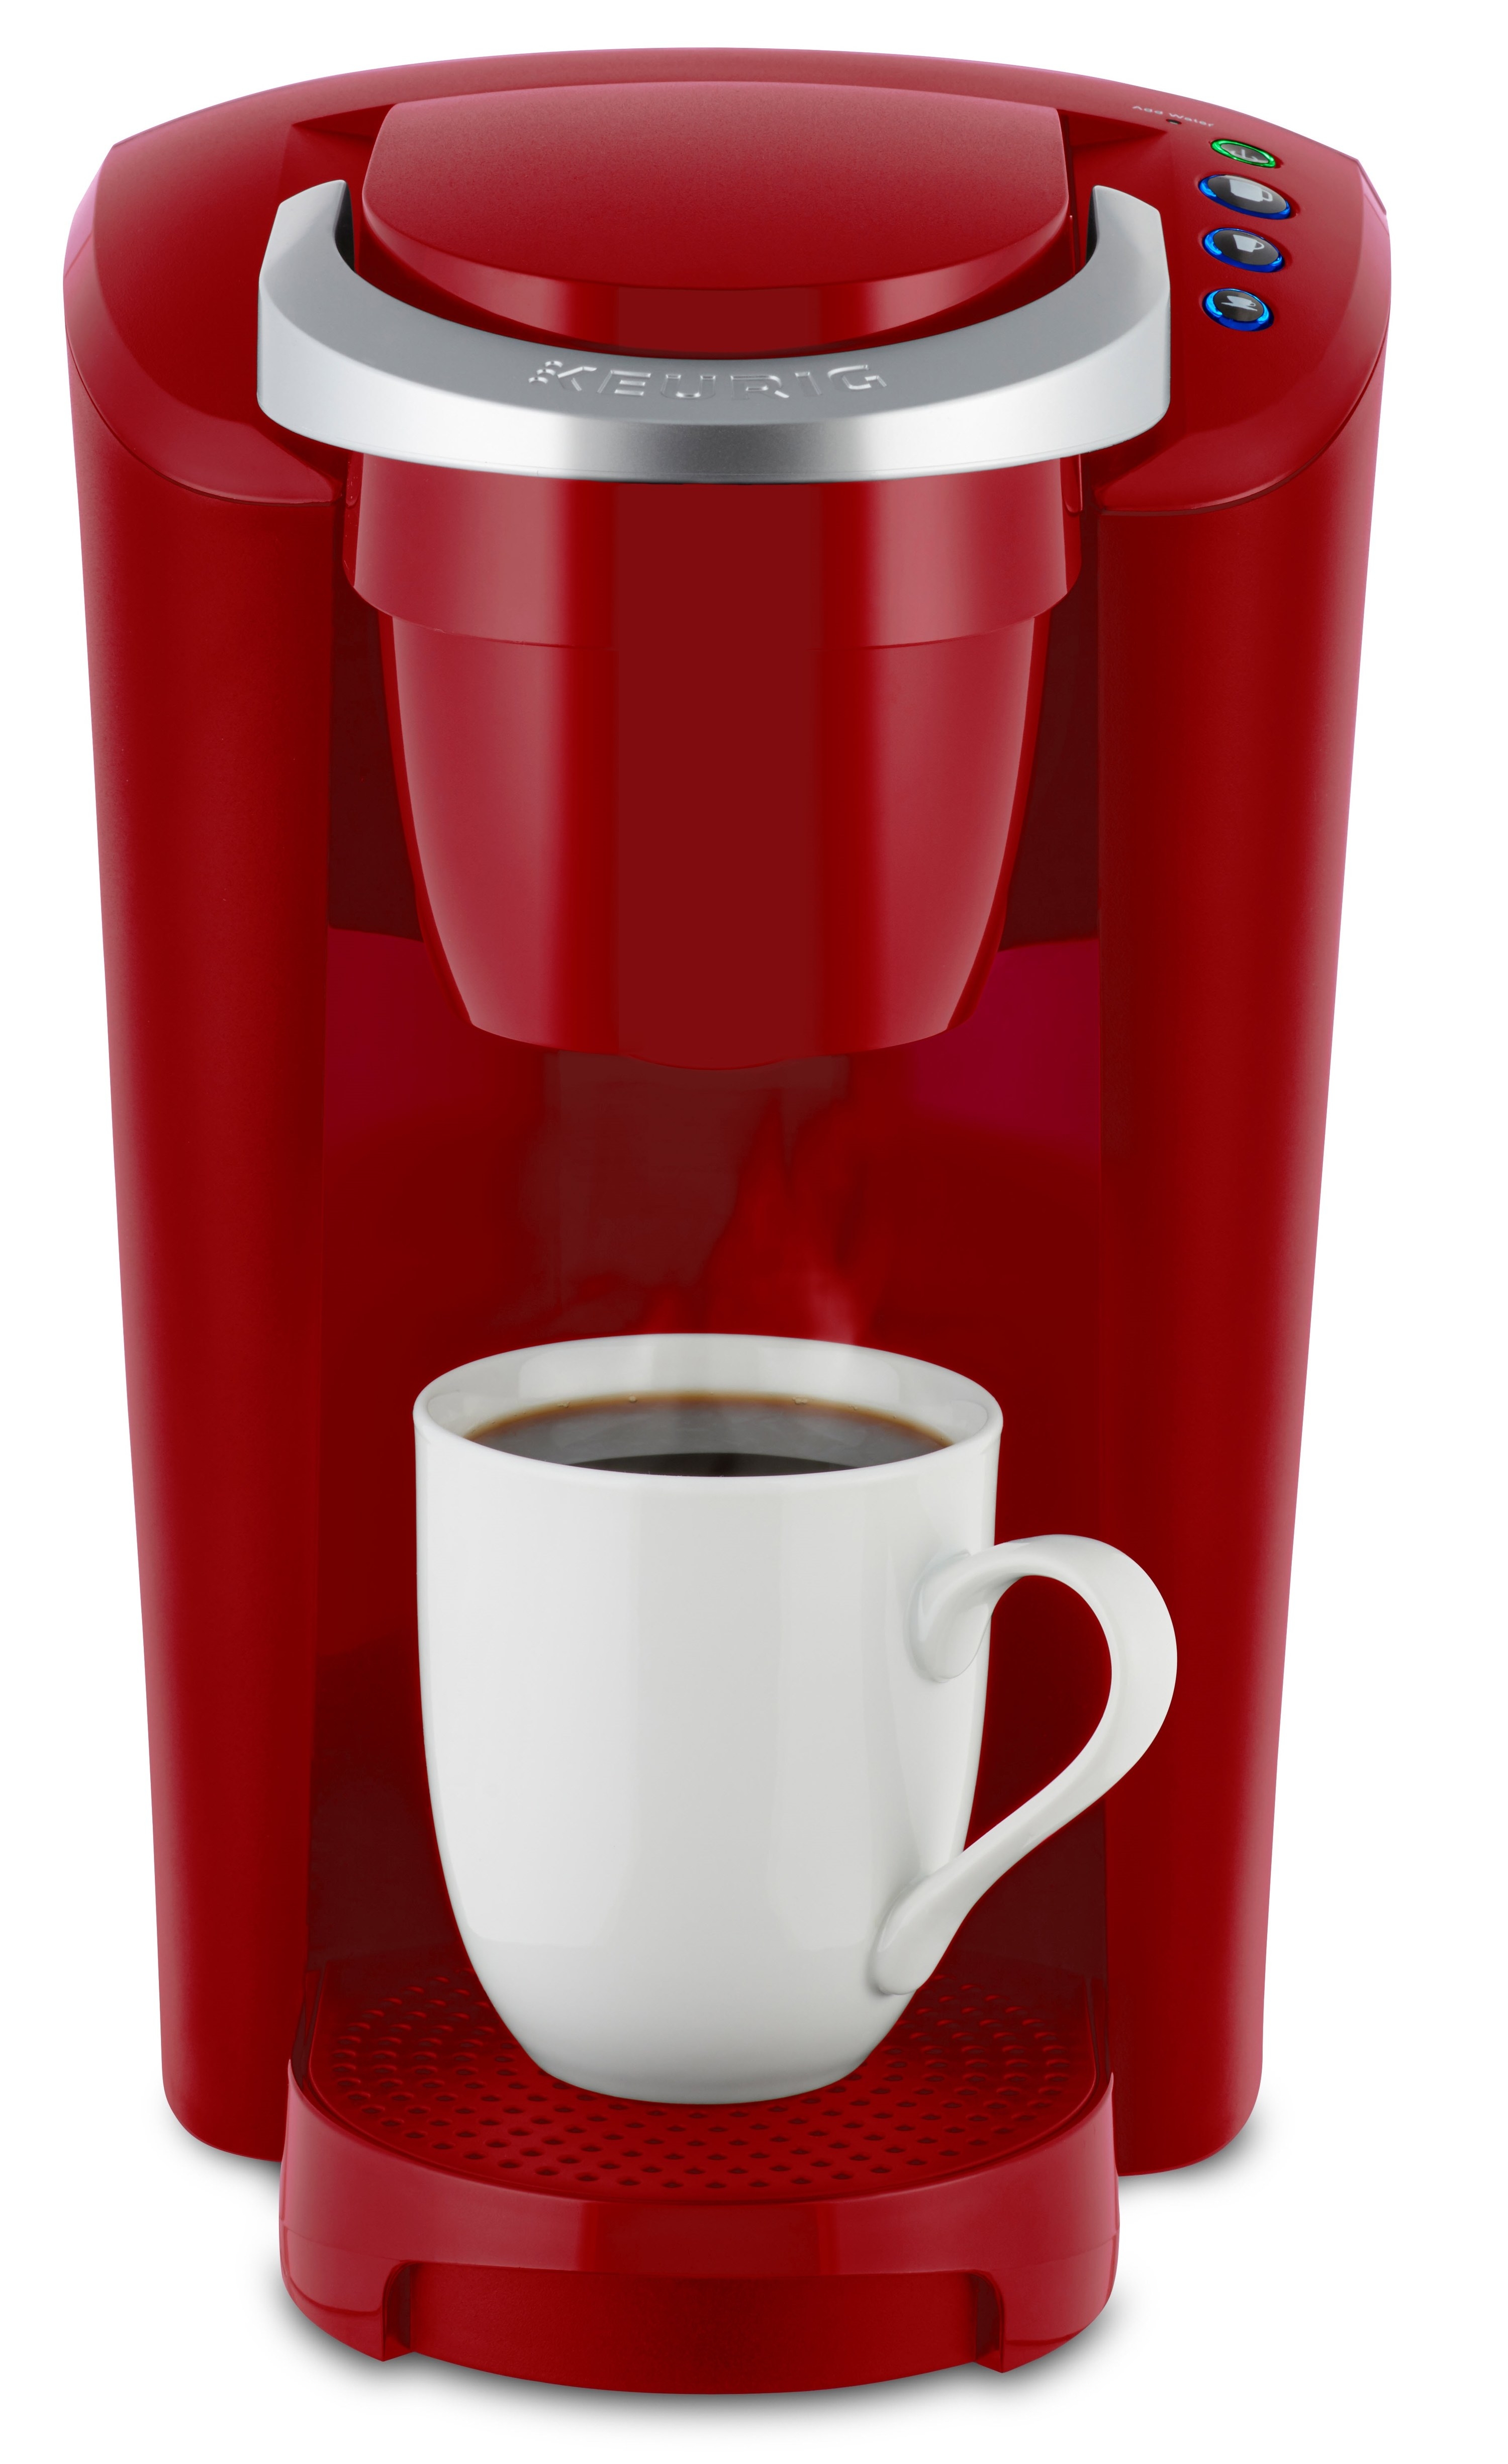 The red coffee maker and a white cup of coffee